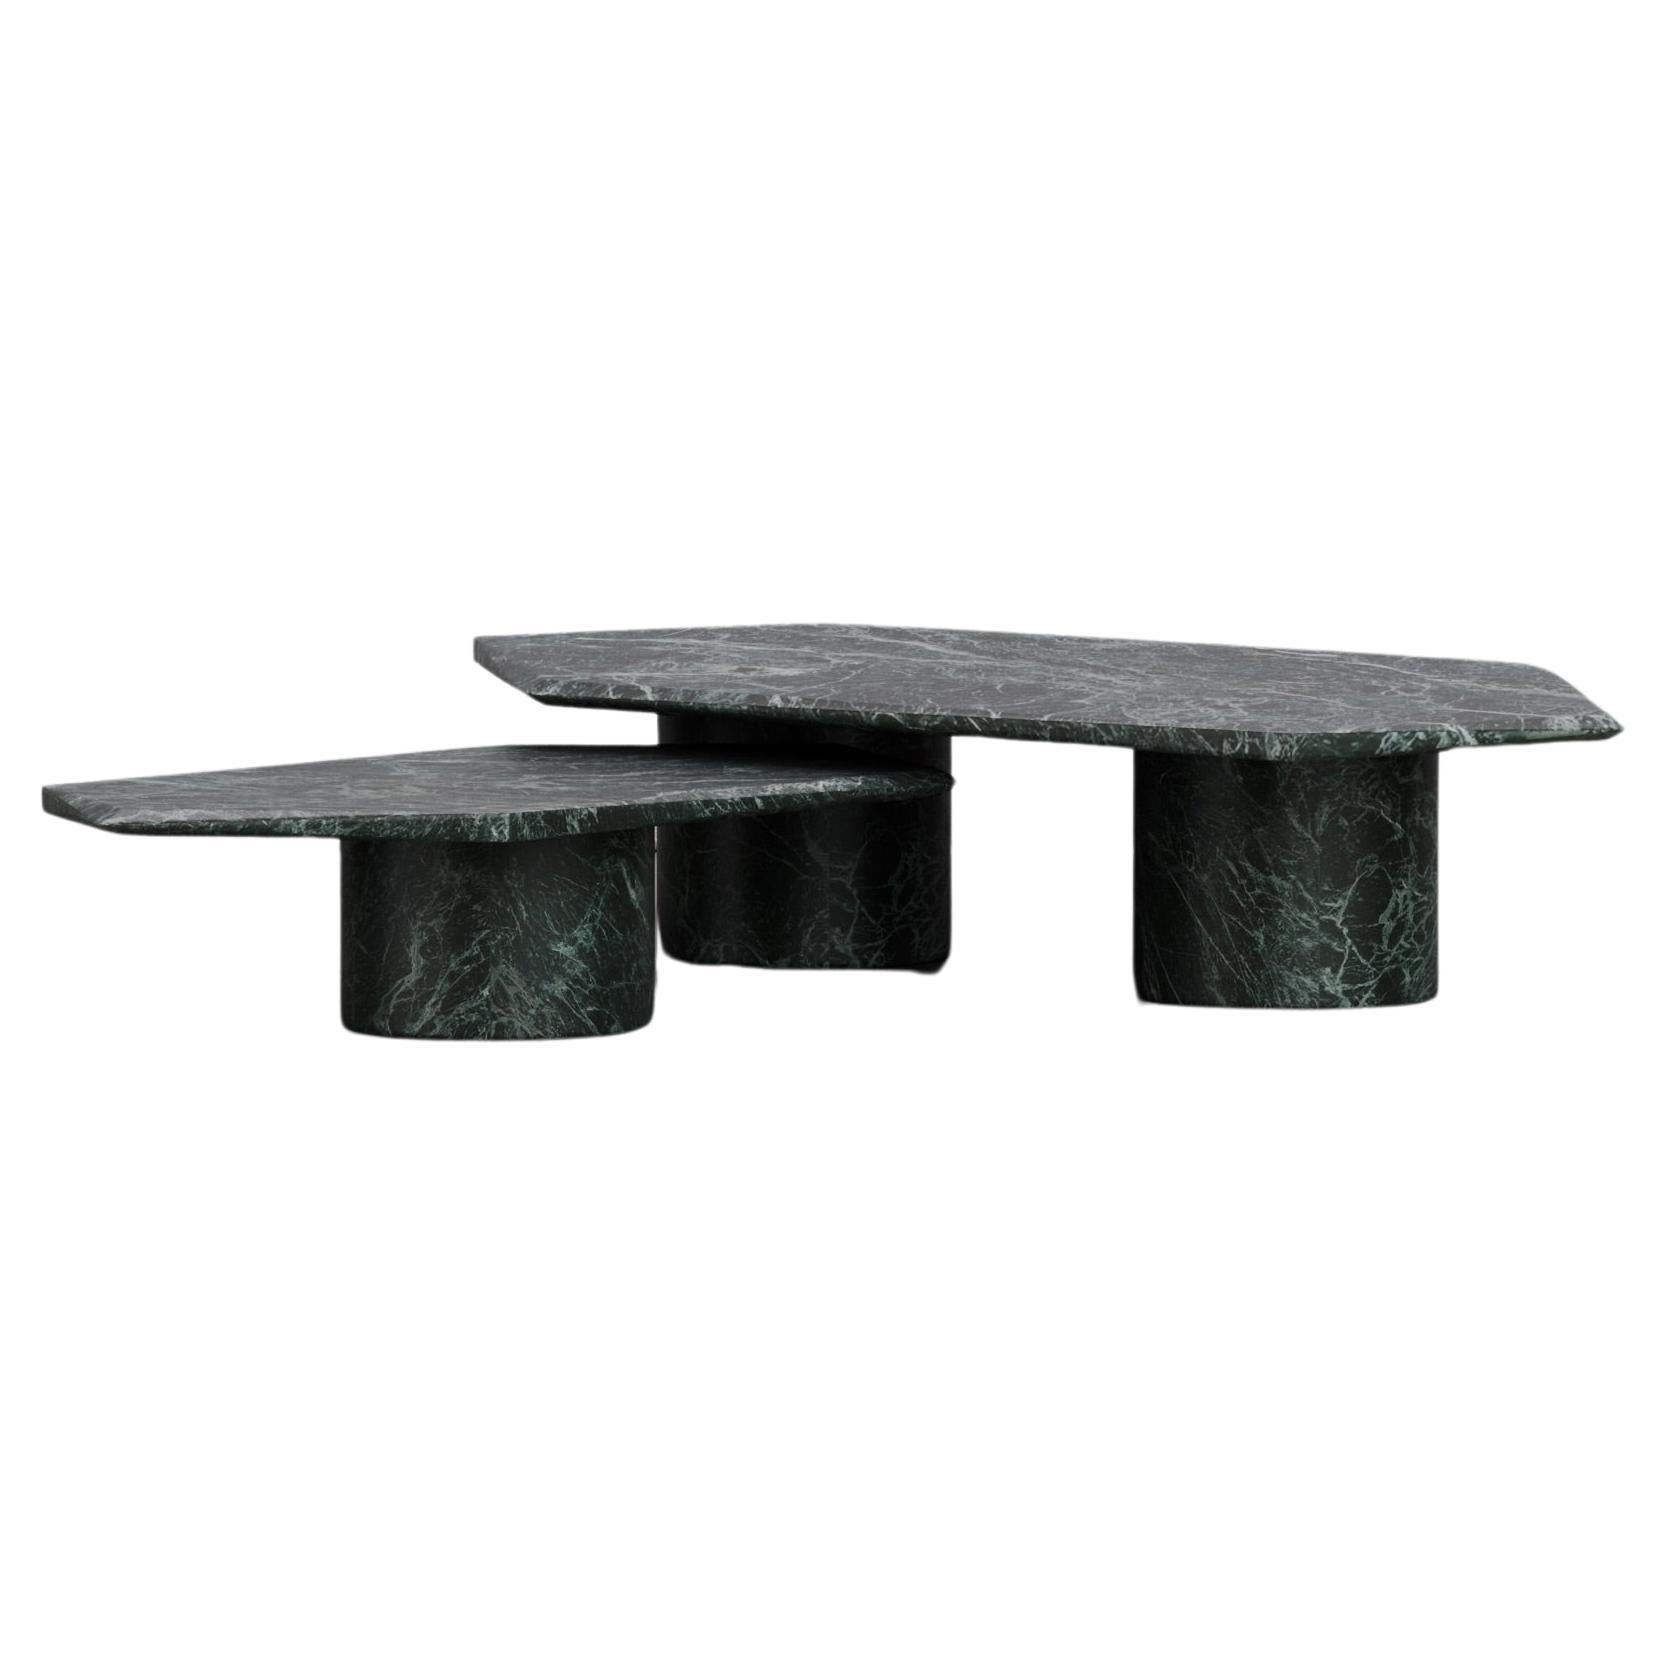 Contemporary SolidVerde Patricia Marble Hera Coffee Table Small by Tim Vranken